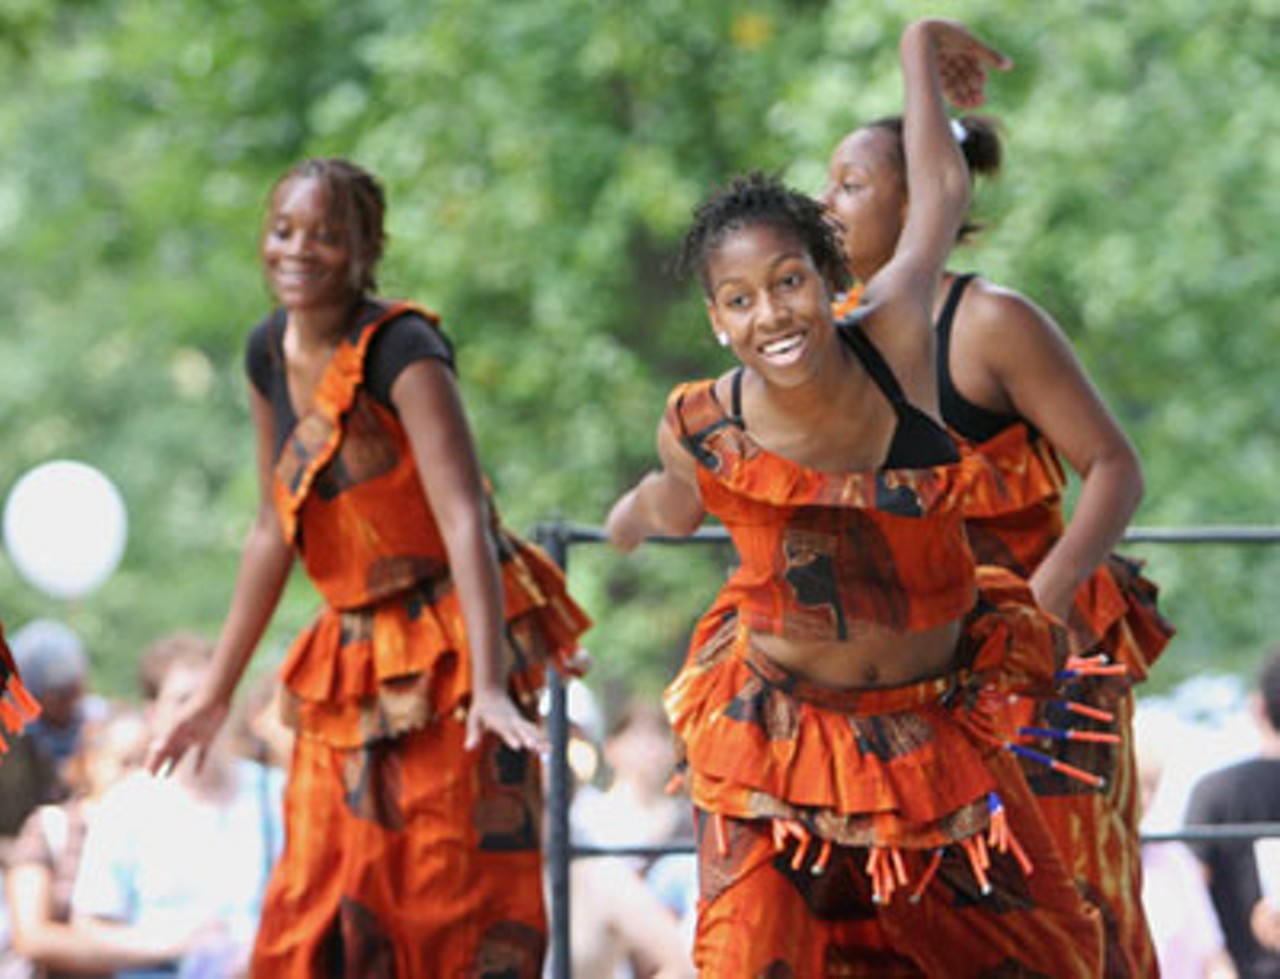 Ahturah Eleeahsah, African American Community Performance Ensemble, dances on the Forest Stage.